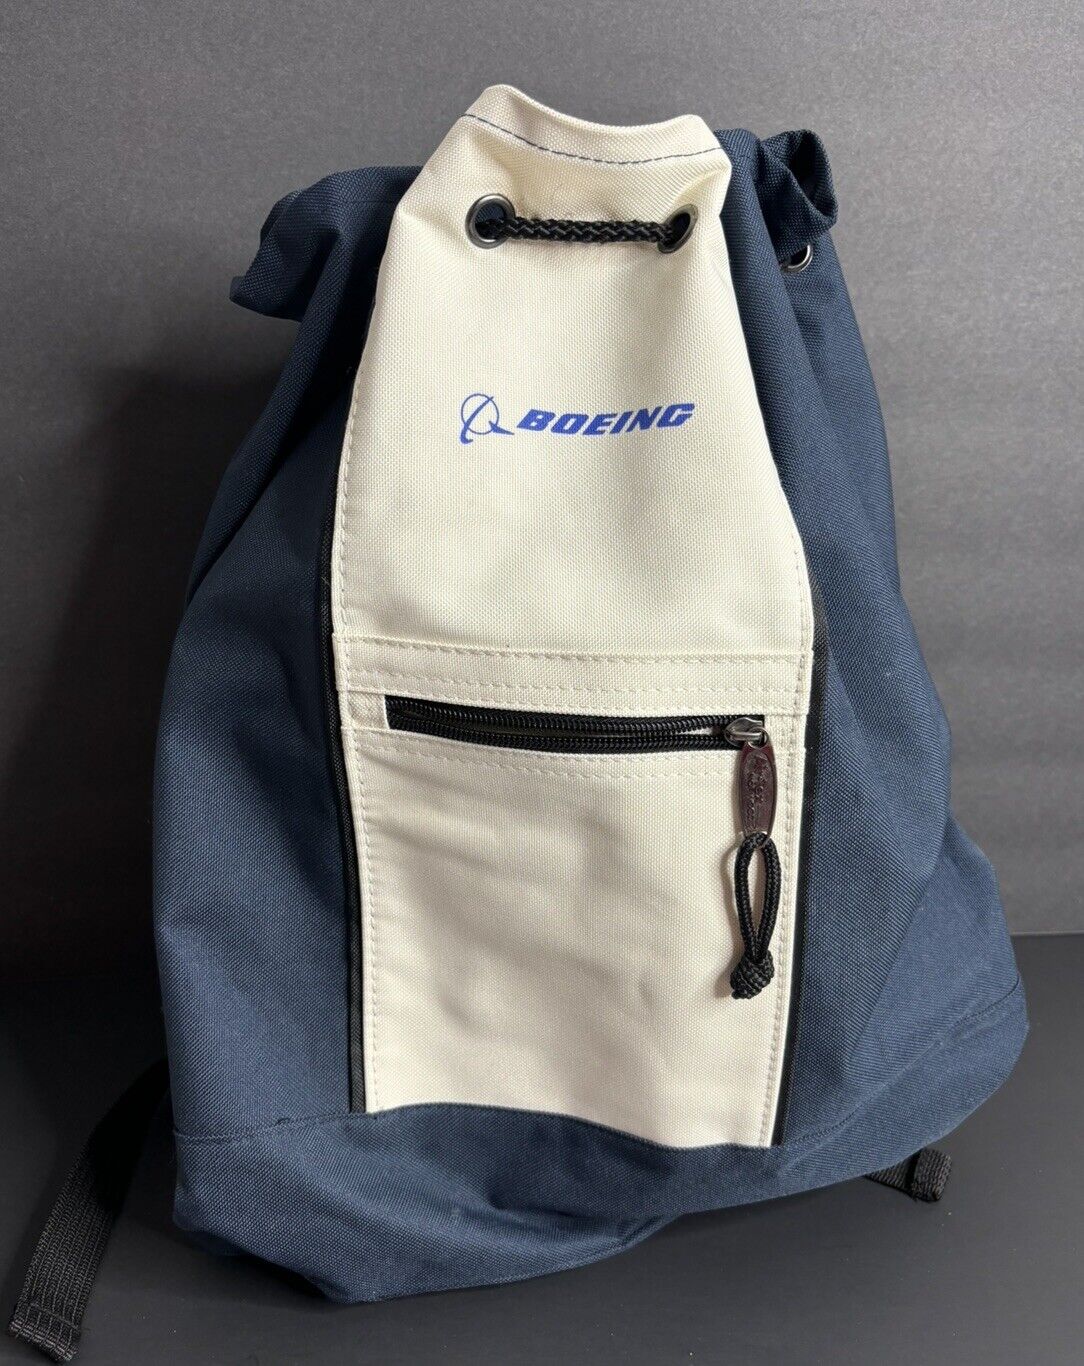 Boeing Backpack Bag Airplane Logo Drawstring Heavy Canvas Travel Carry On